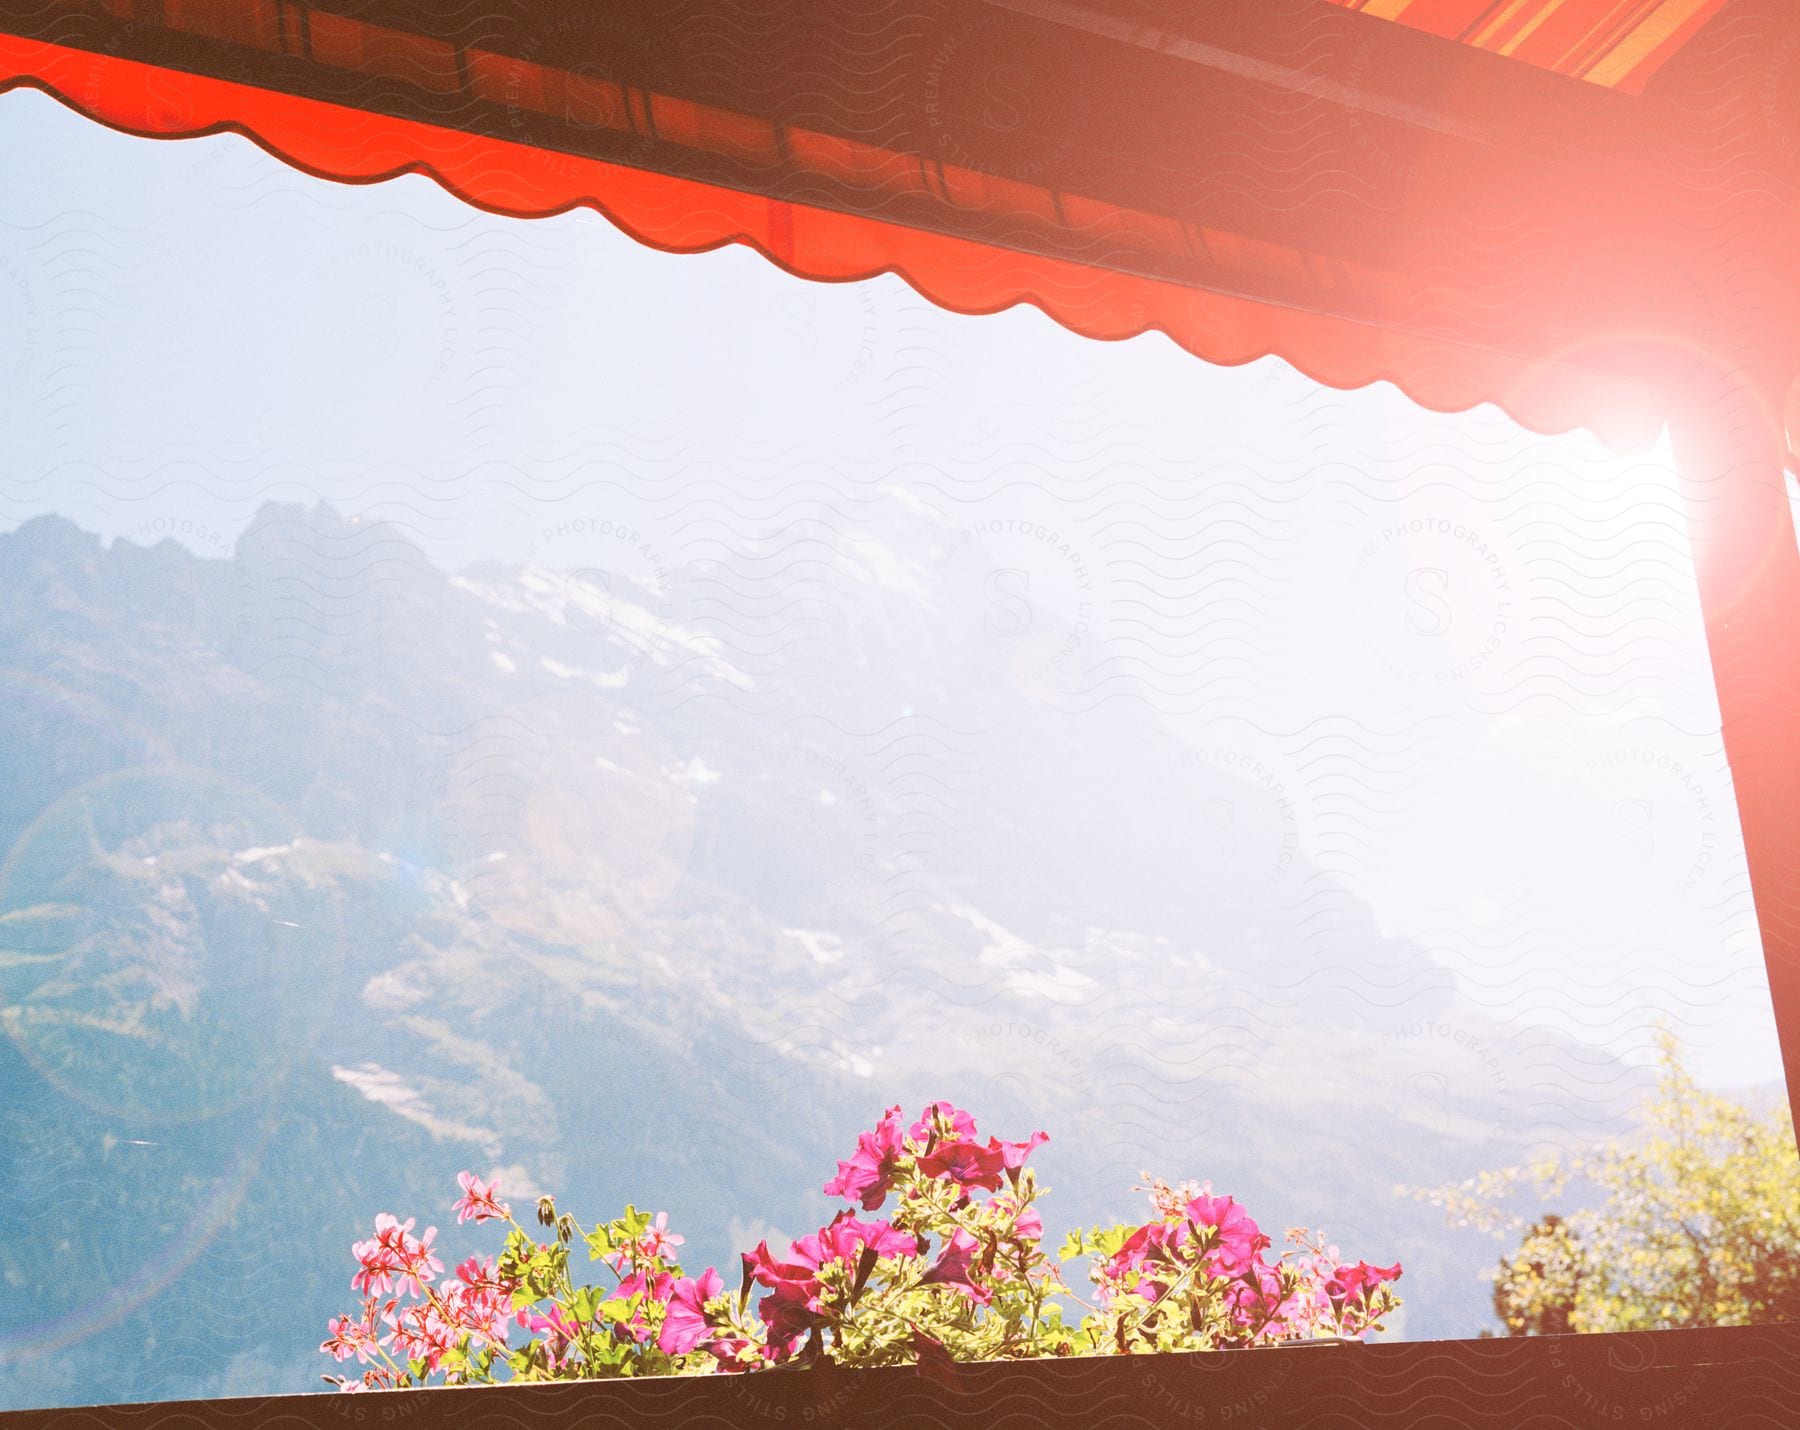 A sunny day in a mountainous landscape with flowers and a restaurant roof